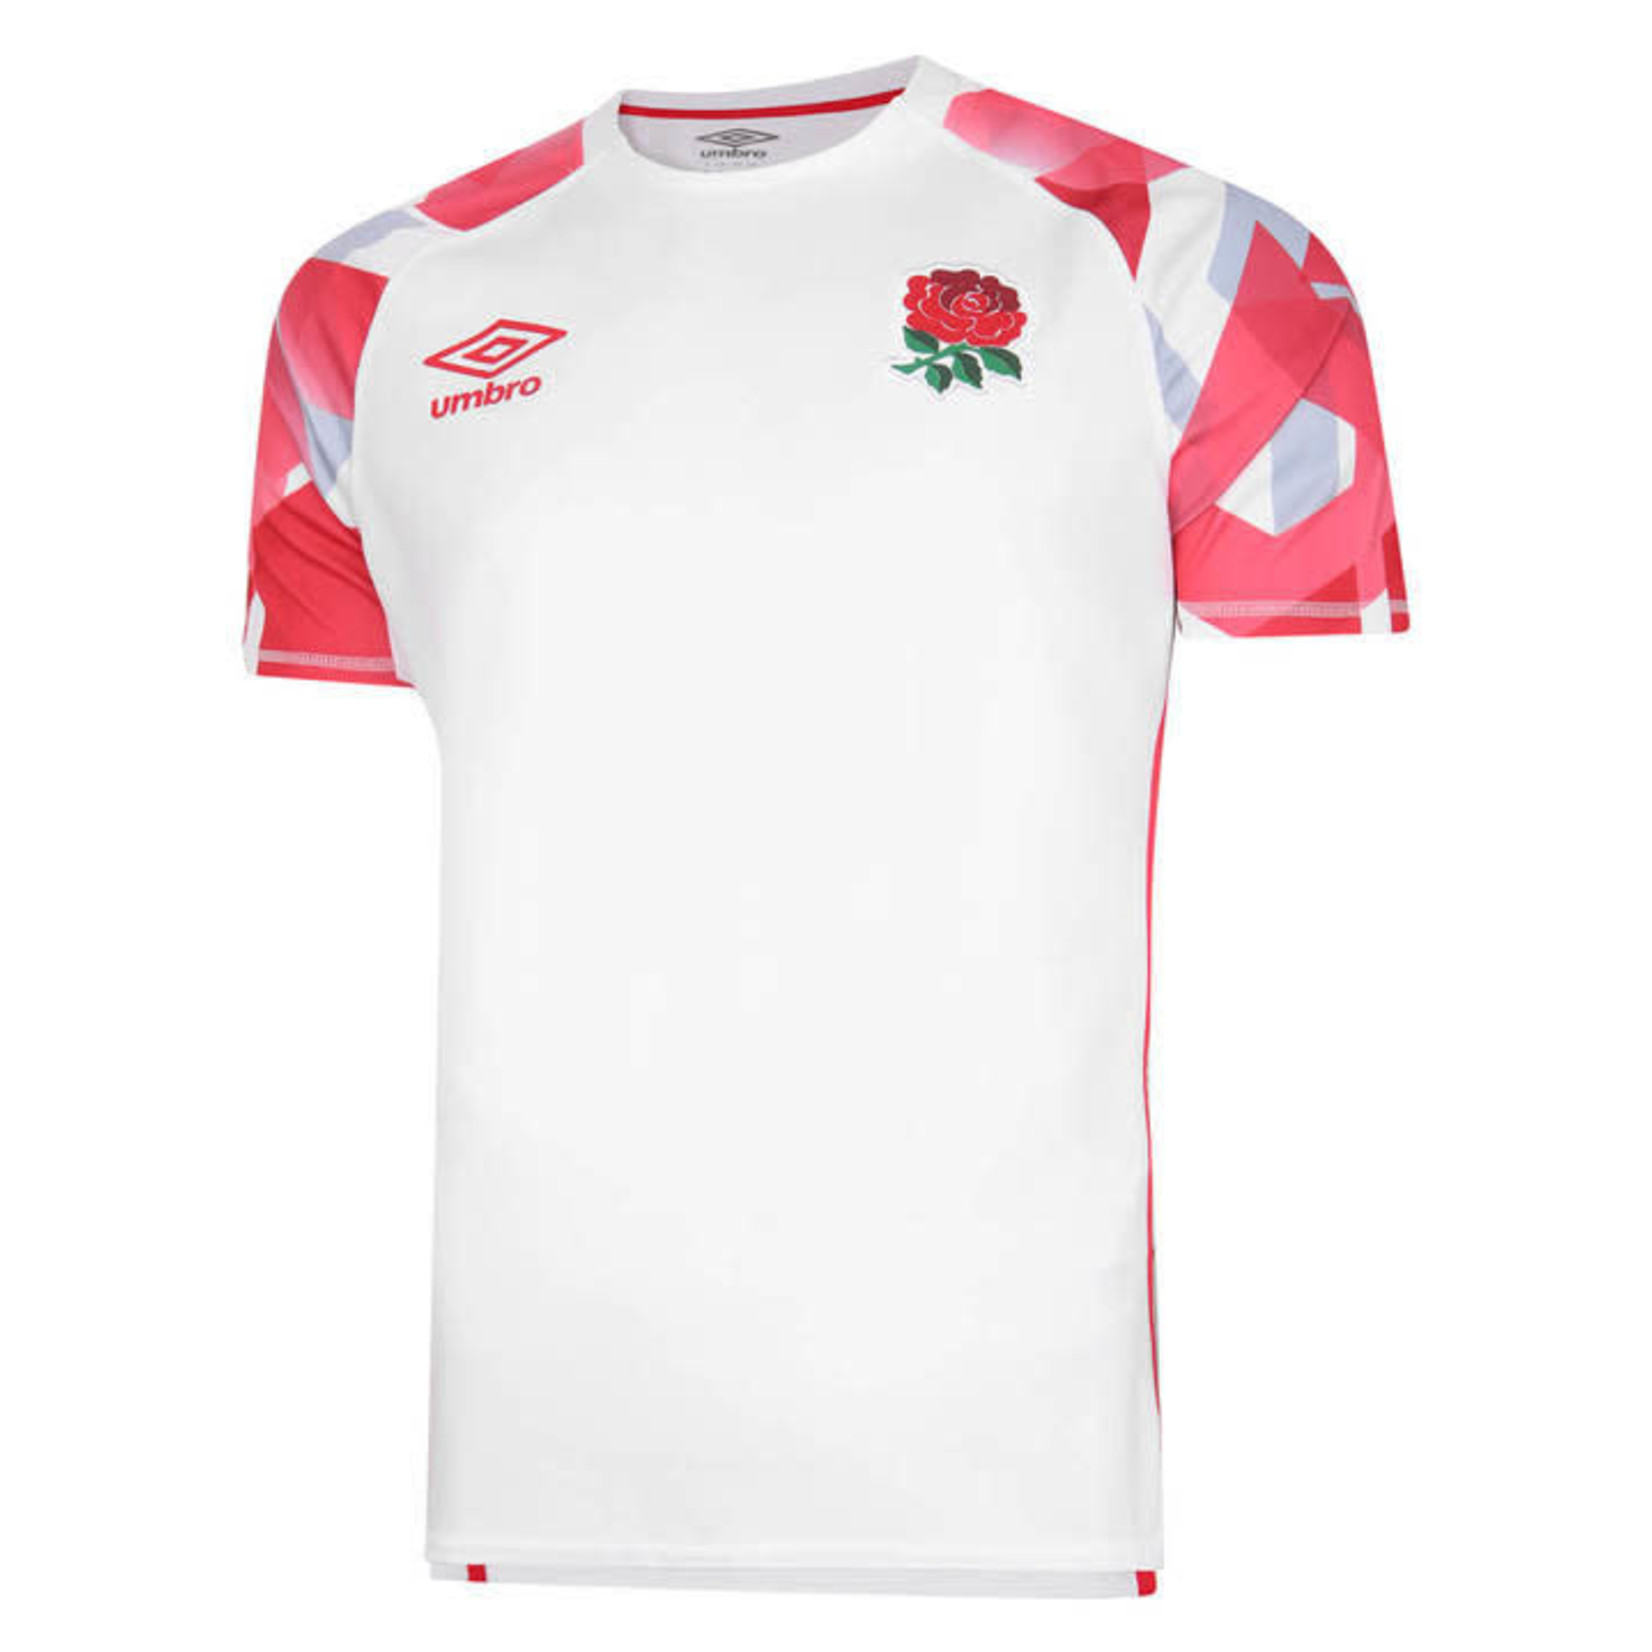 ENGLAND RUGBY 7S JERSEY